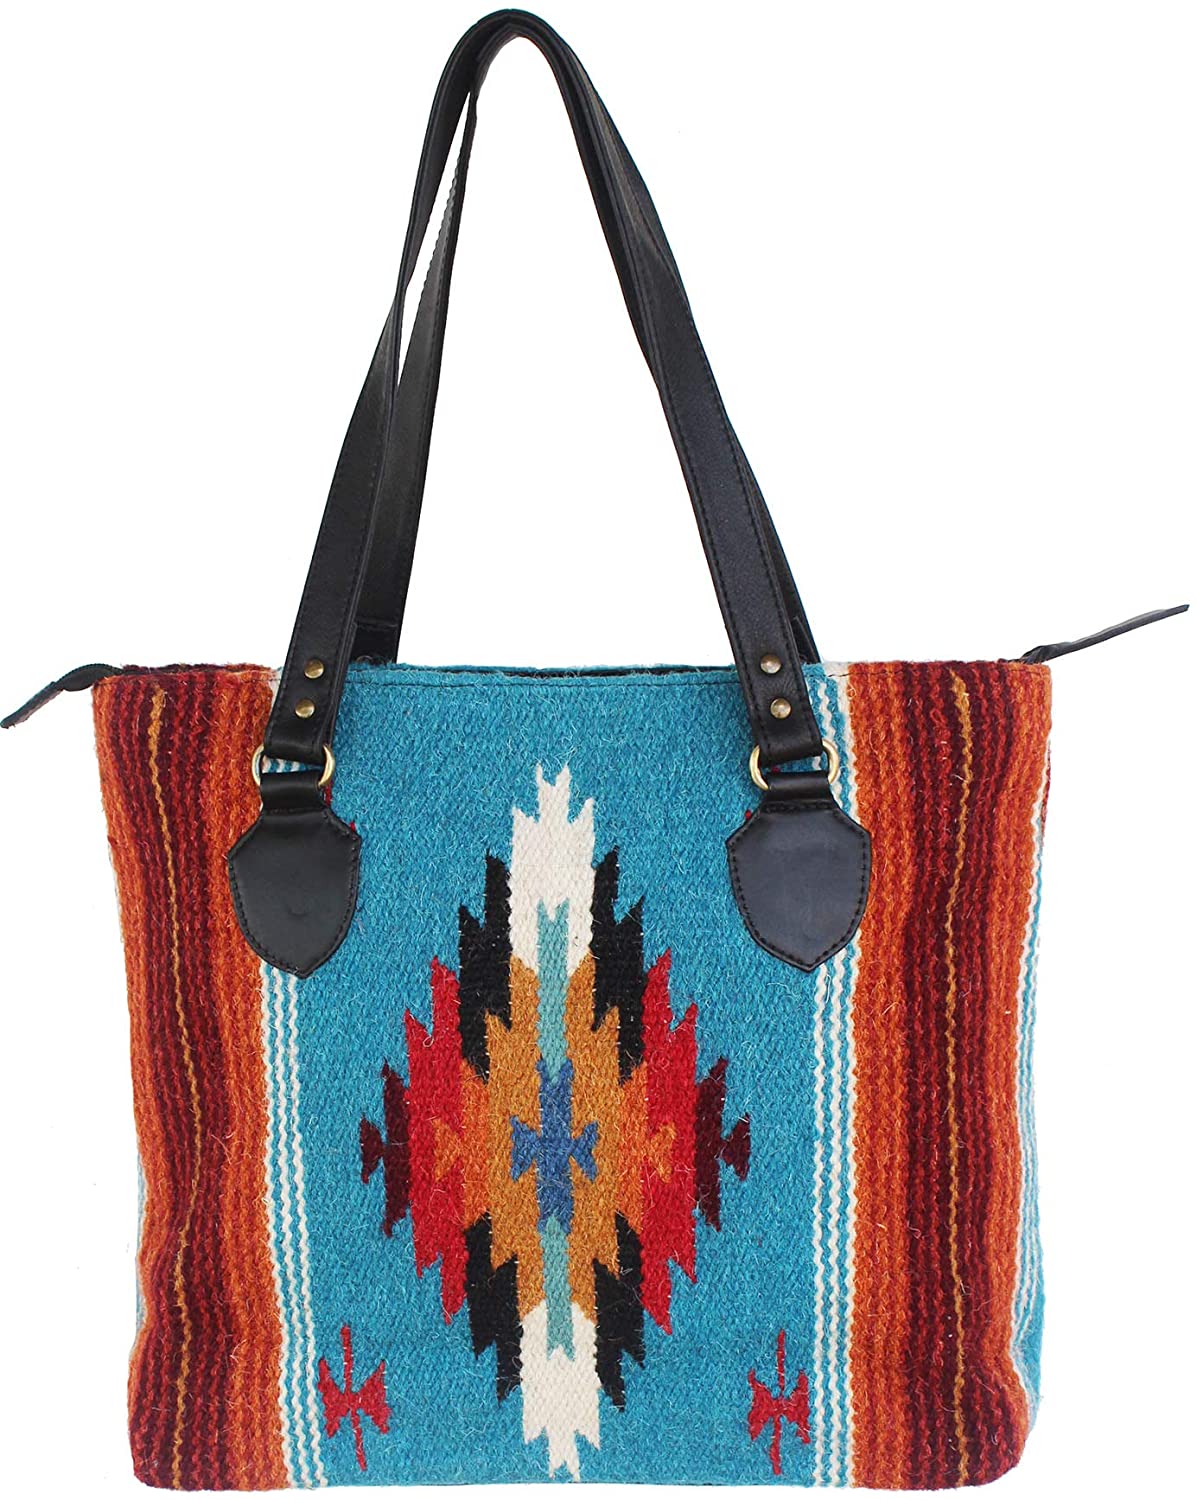 CHALLENGER Southwest Wool Tote Purse Bag Hand Bag Native American Style Handwoven-Wool